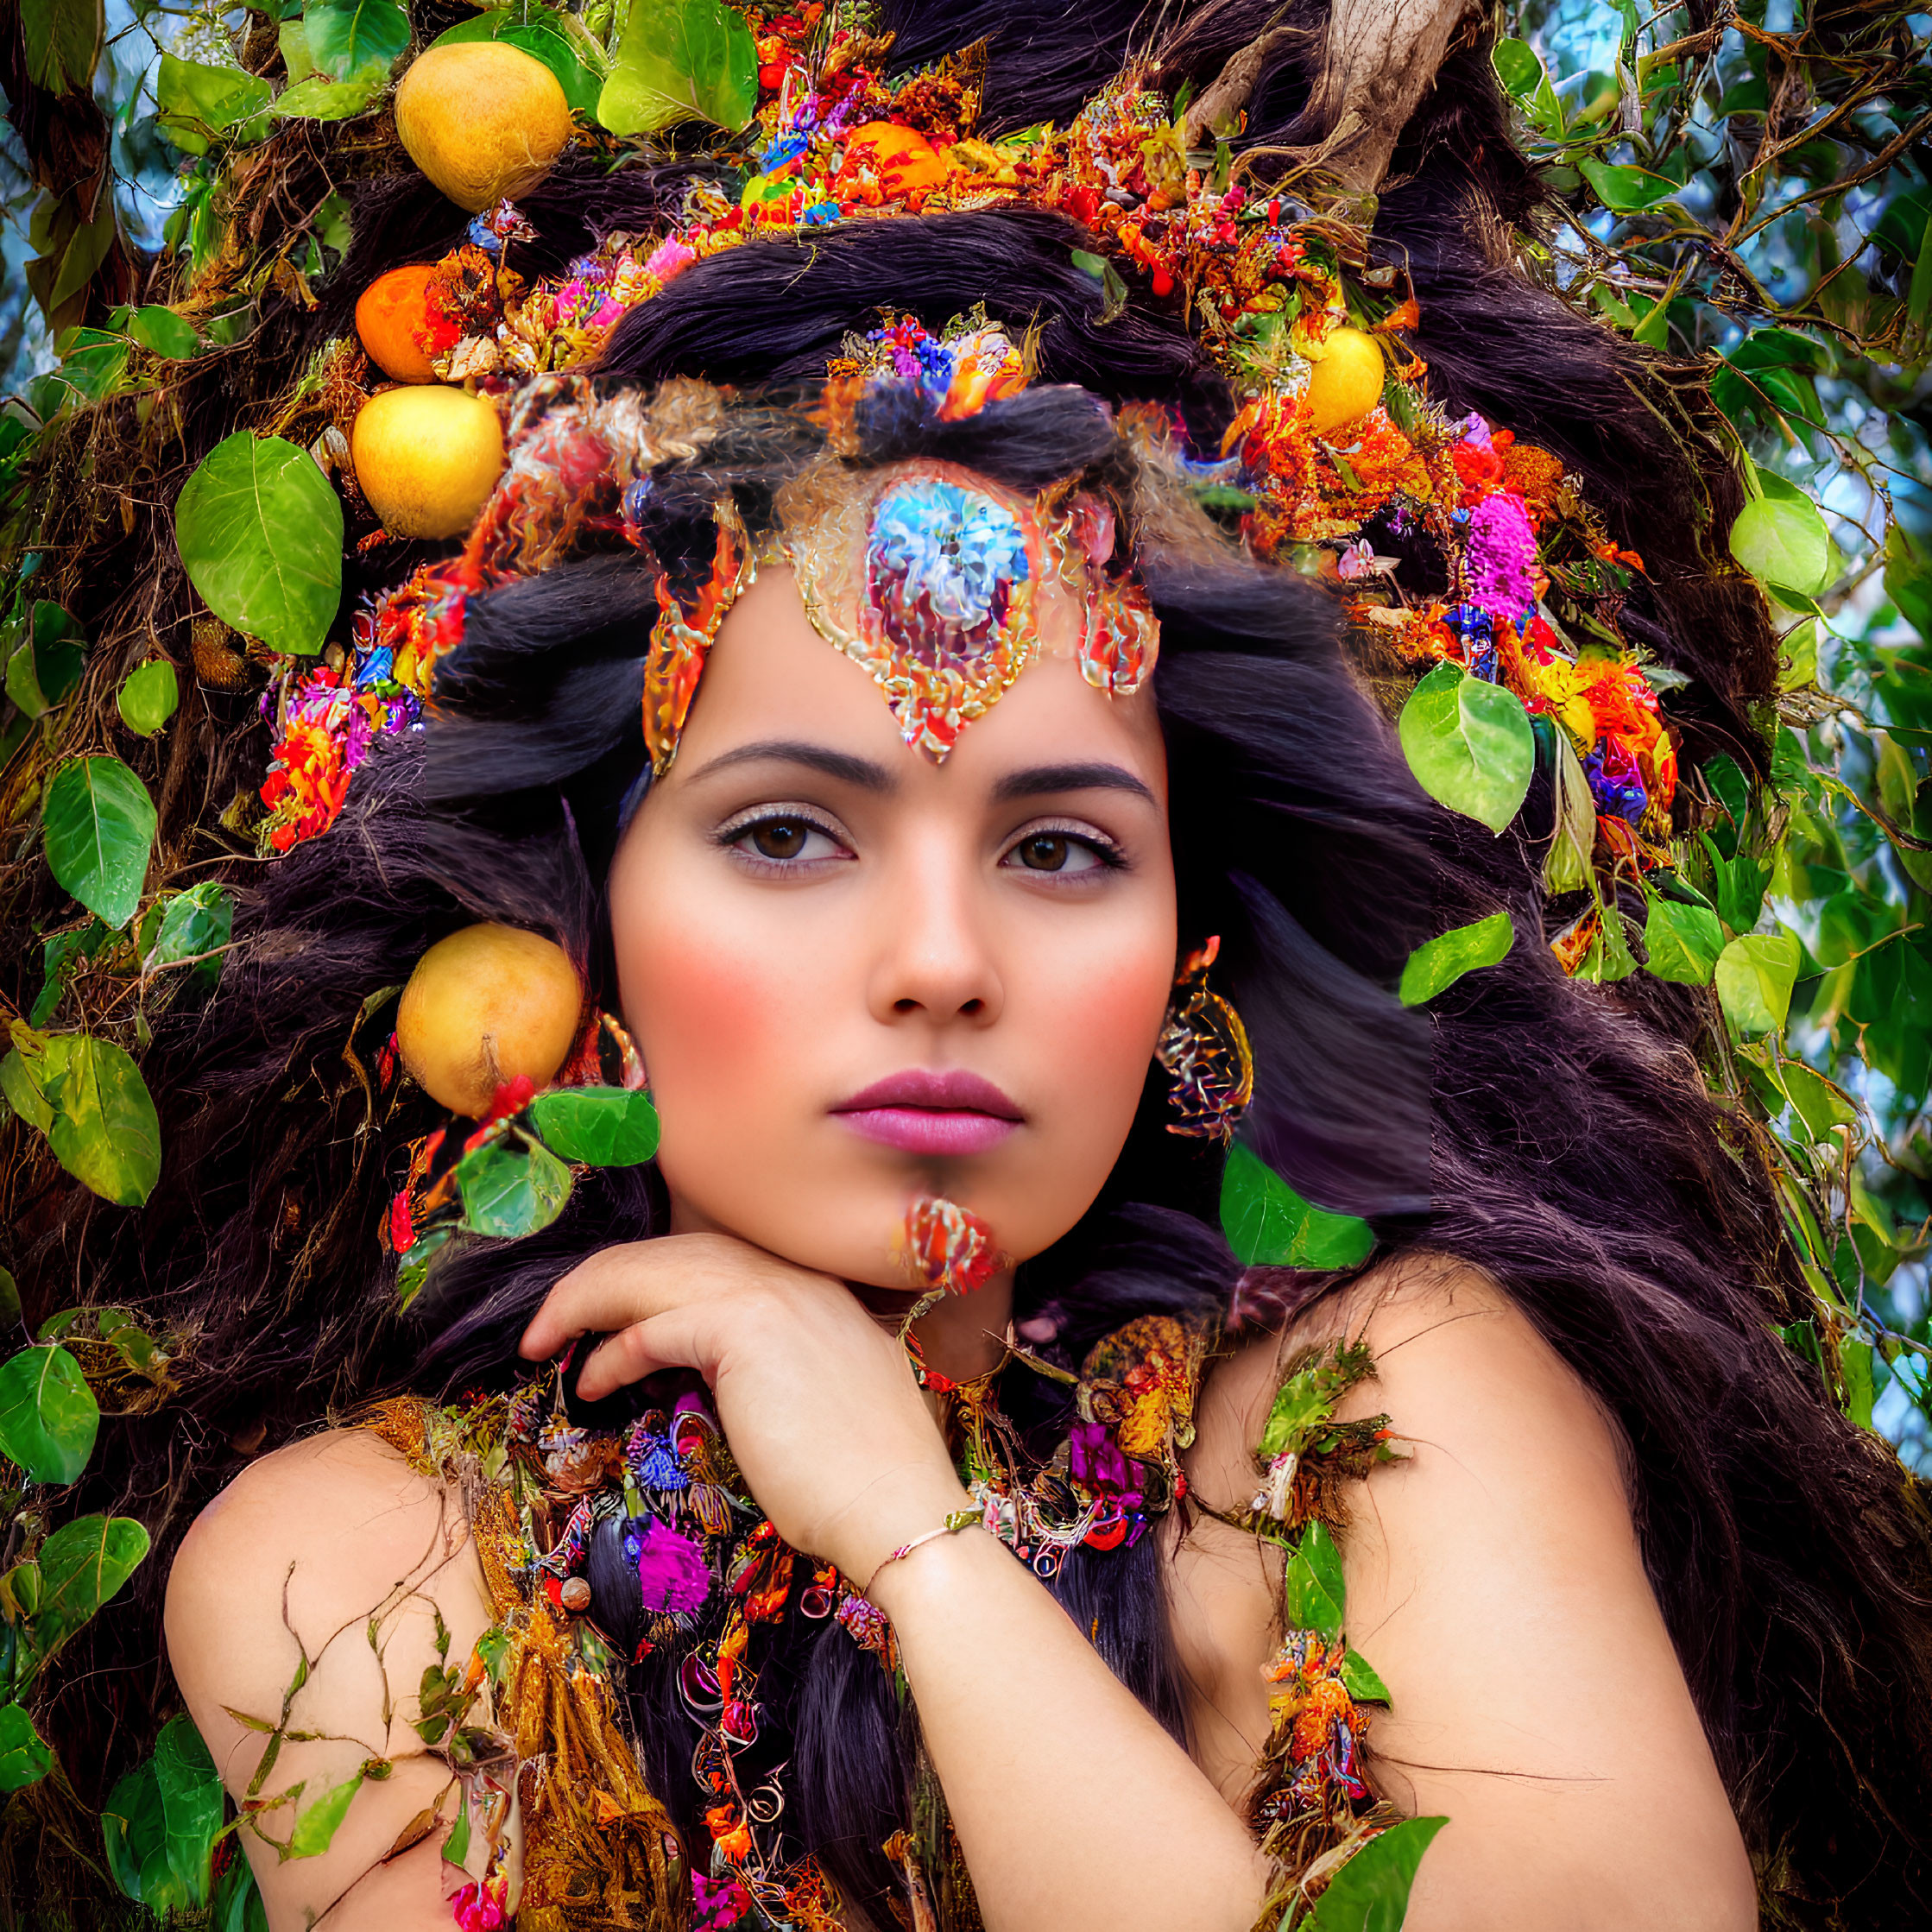 Colorful Woman with Fruit Headdress and Jewel Poses by Tree